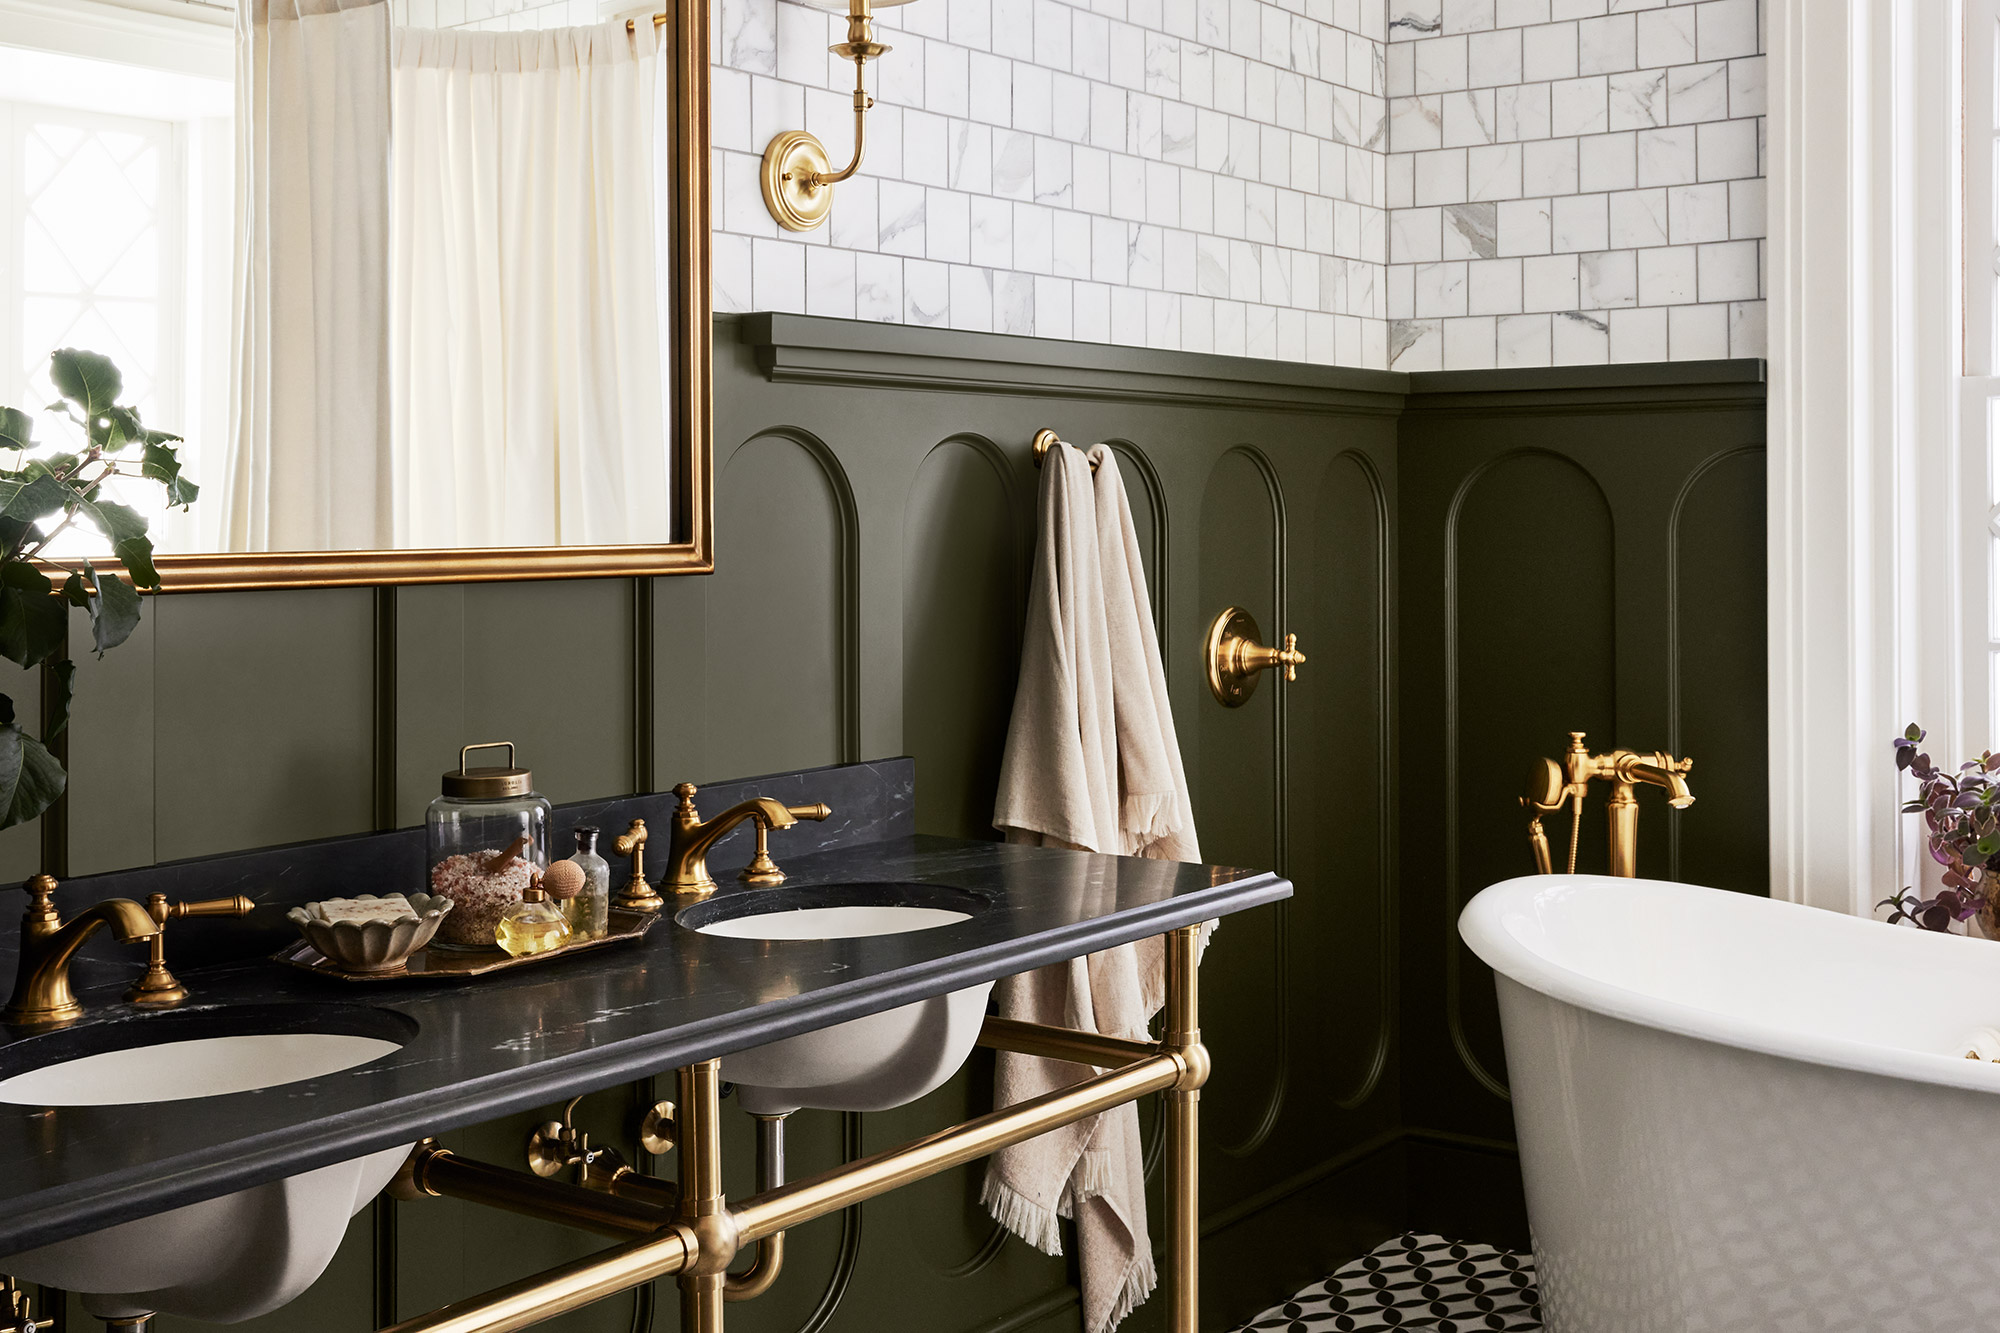 Bathroom image, showing the sink, white tiles on the upper part of the wall, and using the interior paint color Step Stool green from Magnolia Home by Joanna Gaines on wood paneling below.